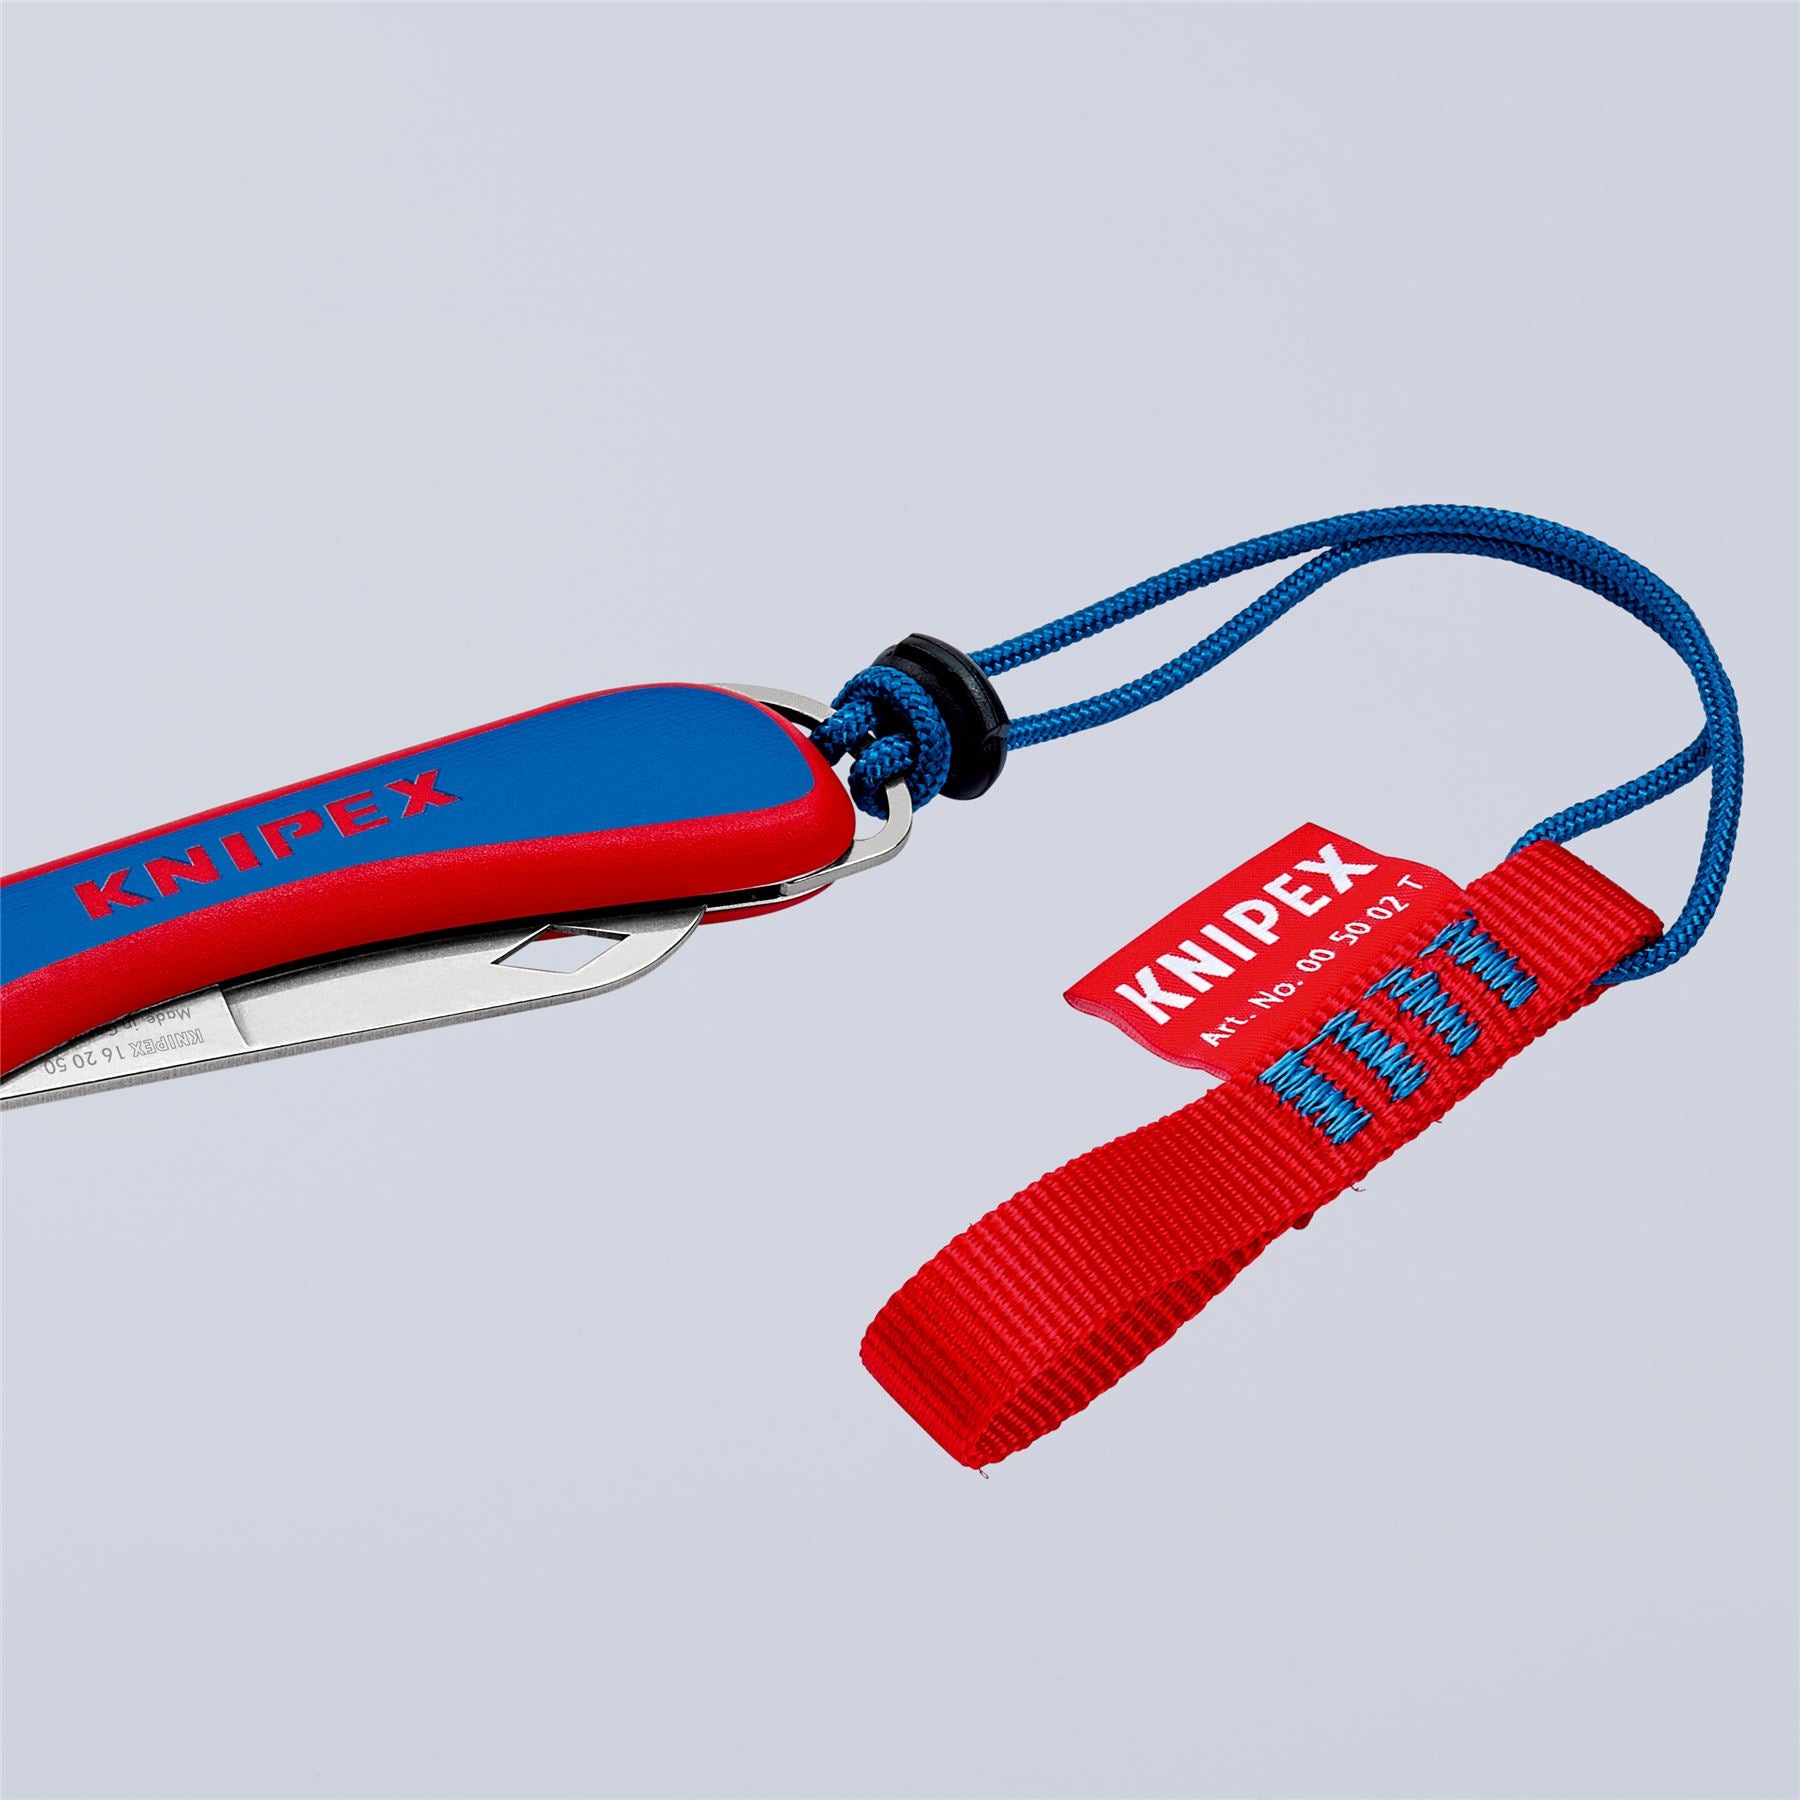 Knipex Folding Knife for Electricians 80mm 16 20 50 SB